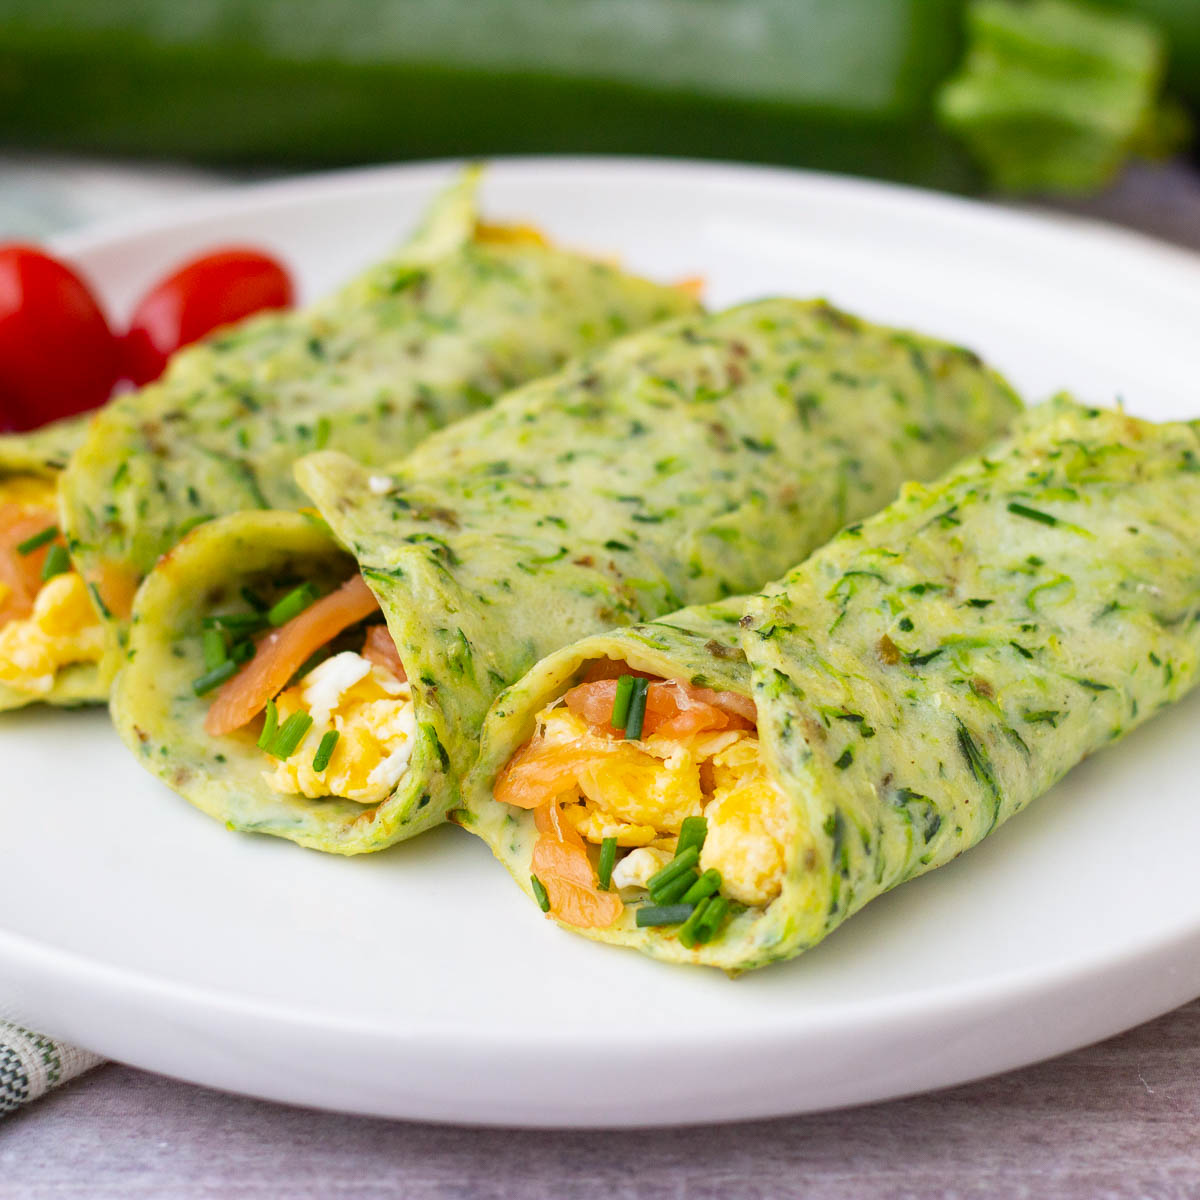 Zucchini breakfast wraps stuffed with egg and lox on a plate